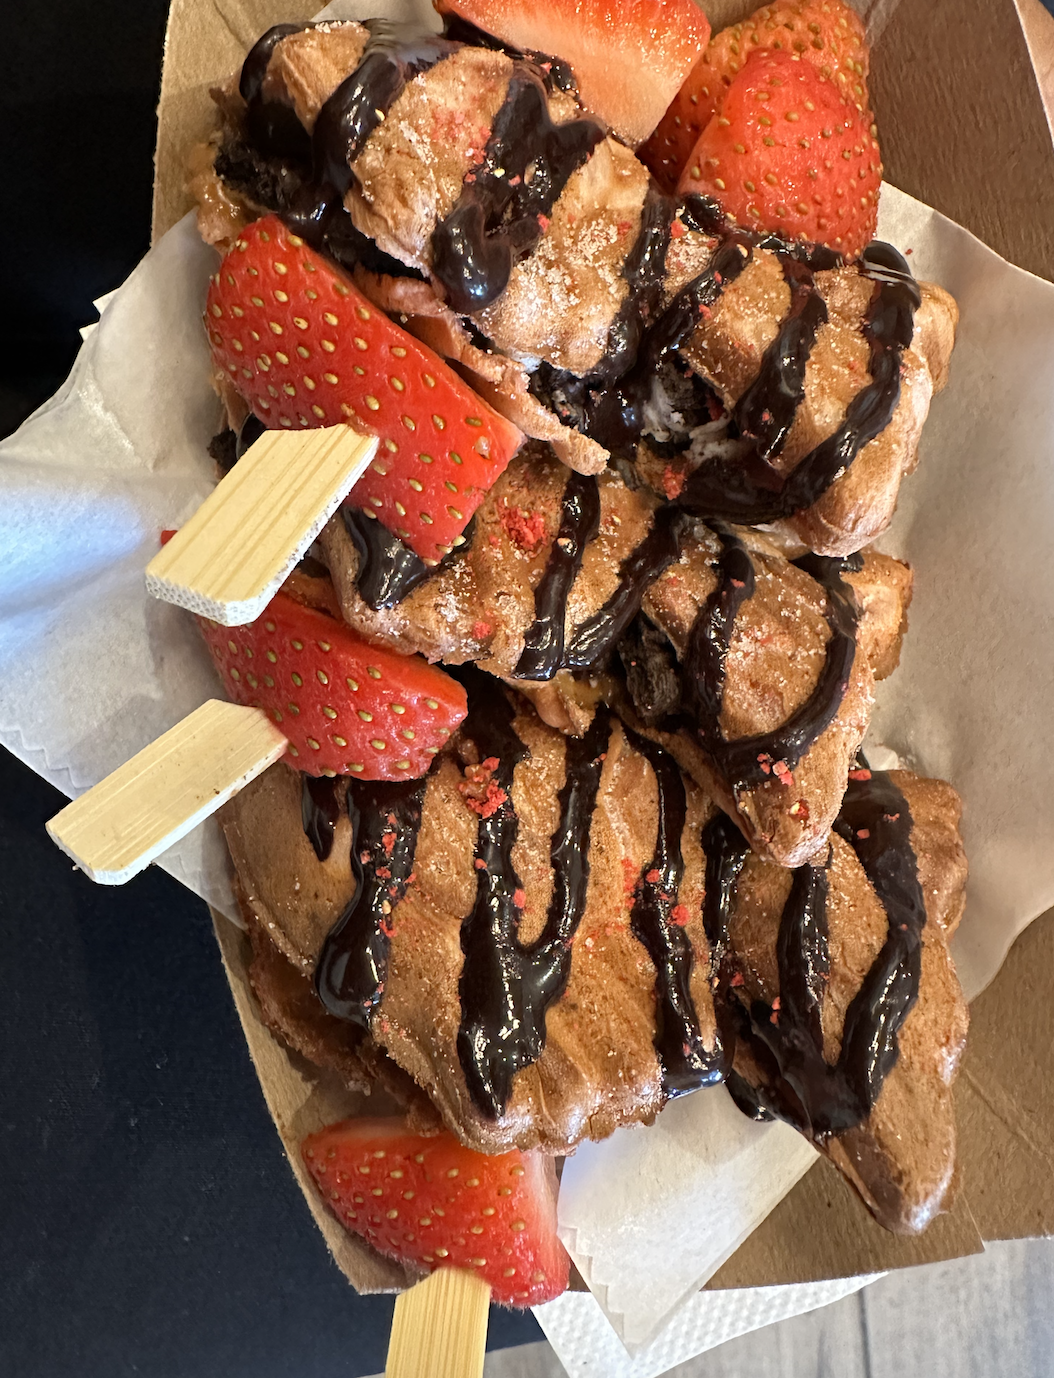    strawberry fiesta -&nbsp;   strawberry flavor biscoff and chocolate chips filling, topped with chocolate sauce, oreo crunch and strawberries!  